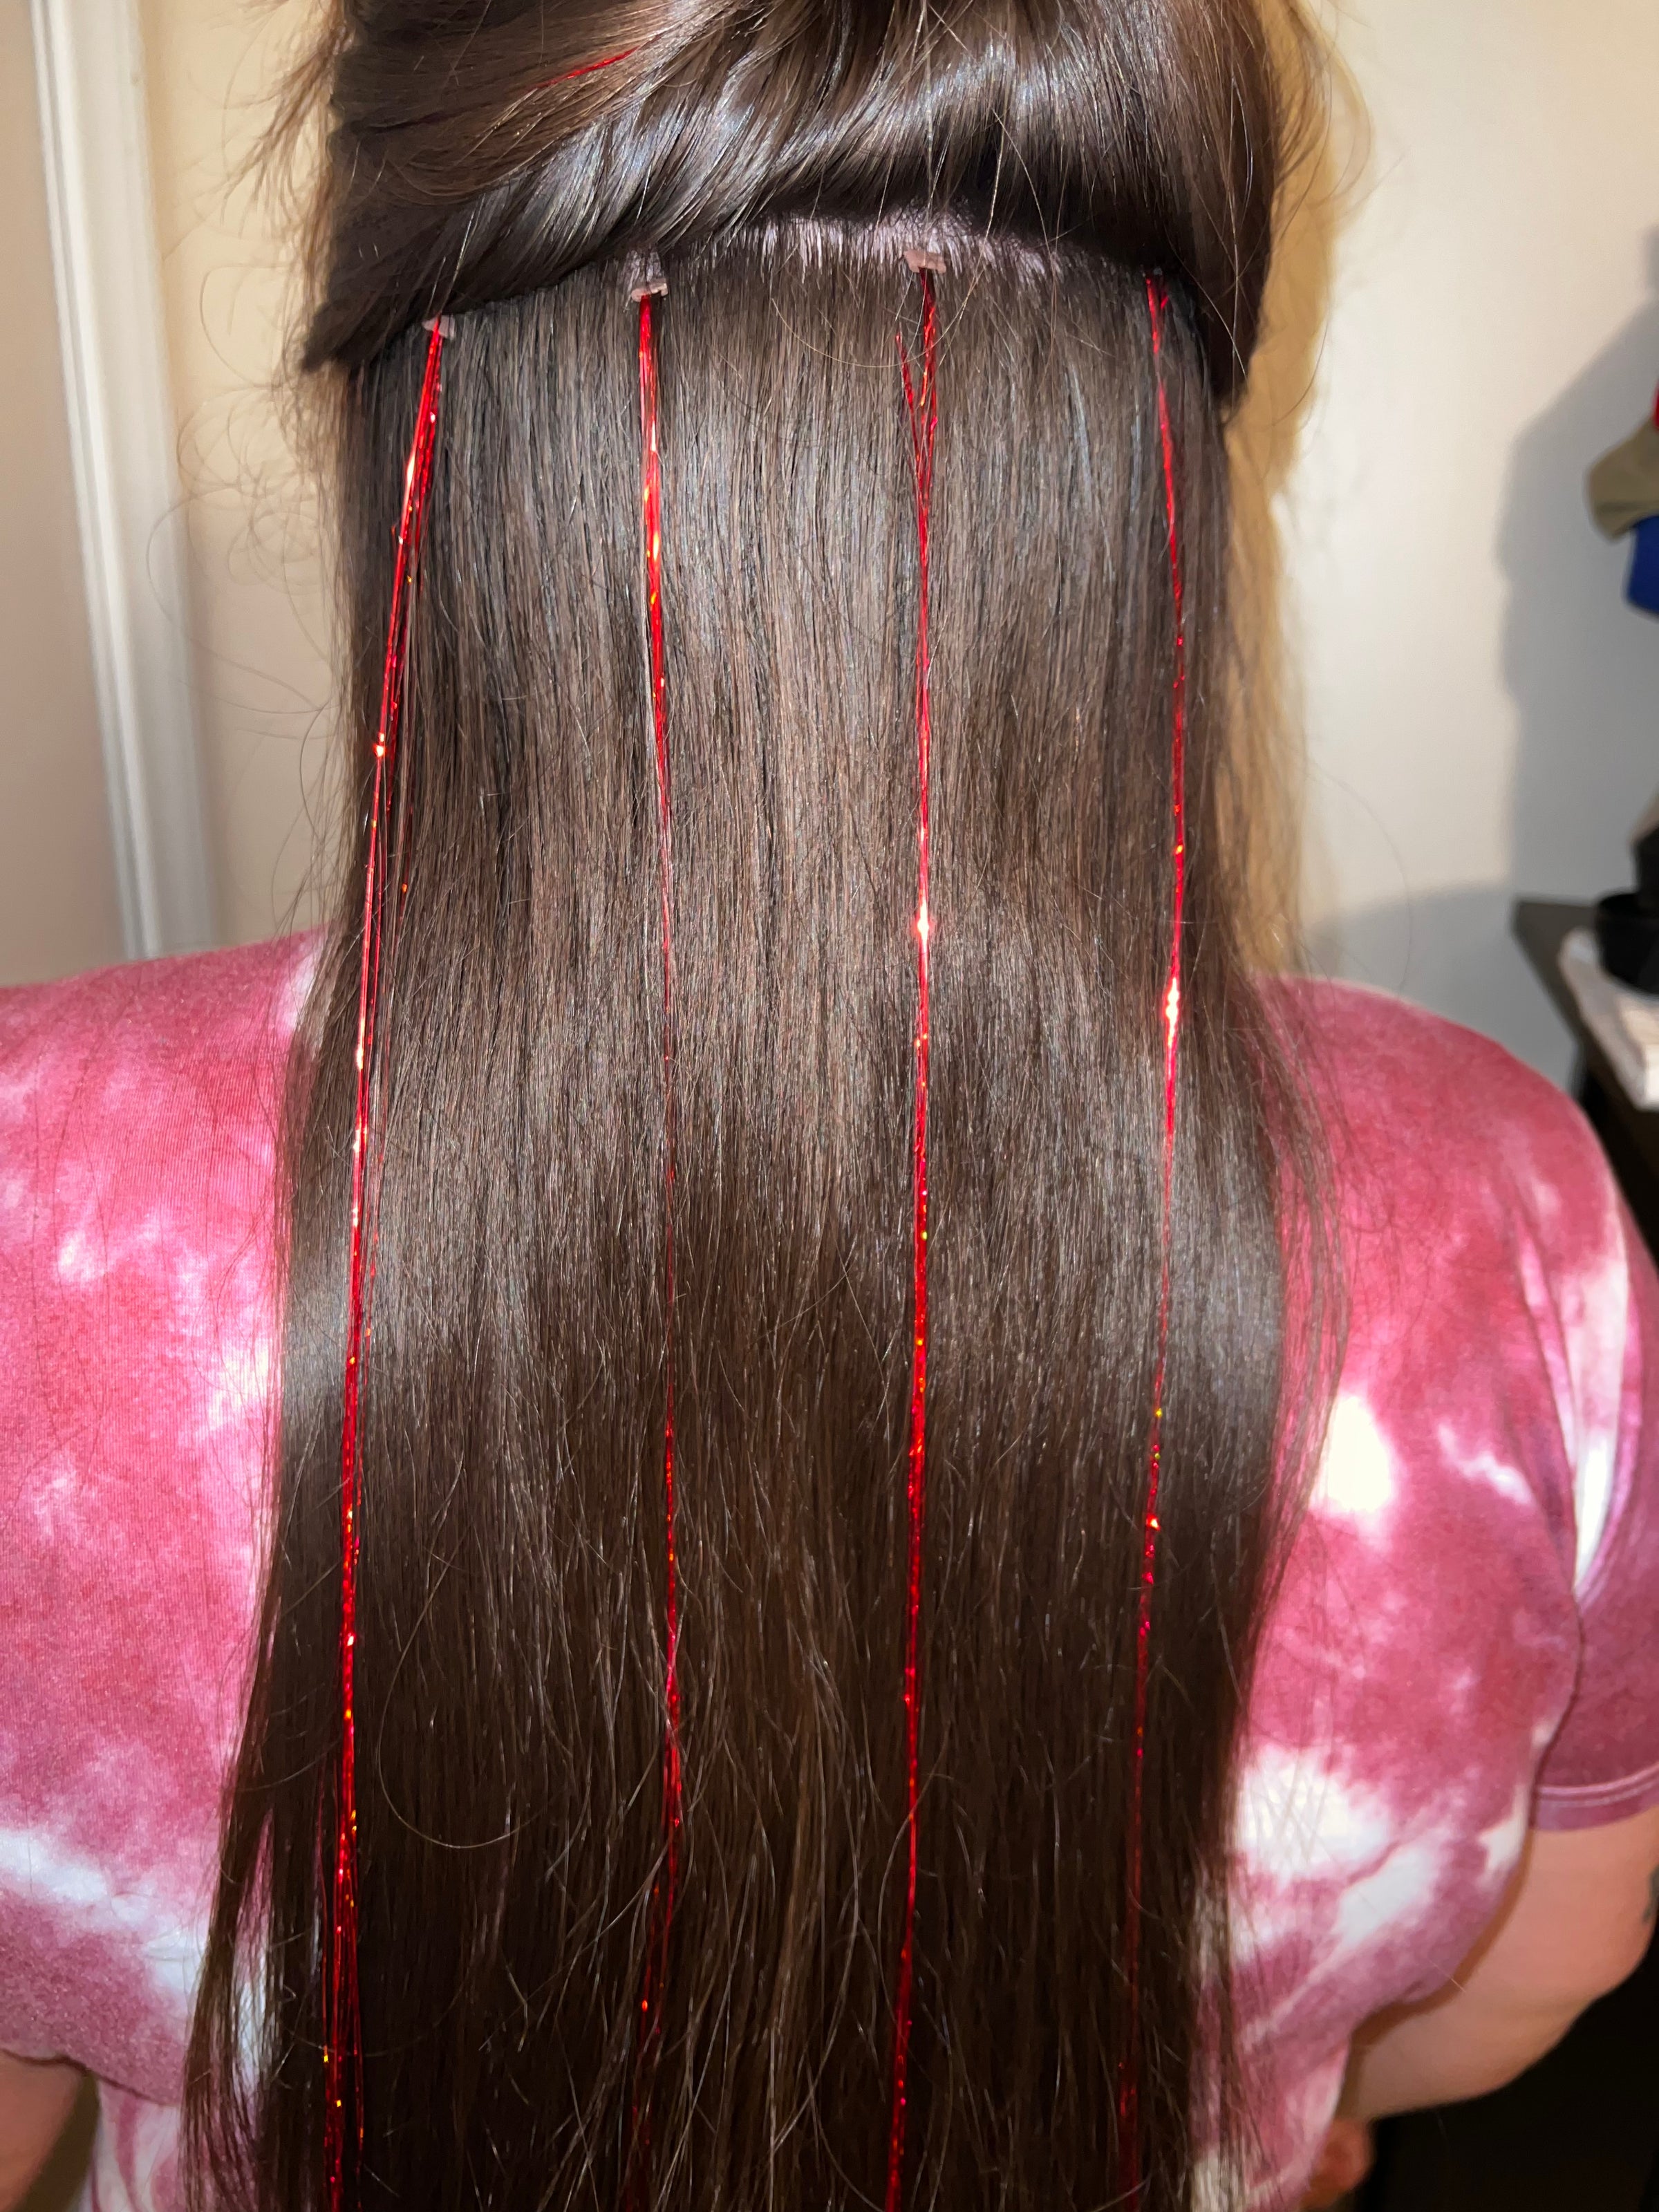 Hair Tinsel Installation with Bead